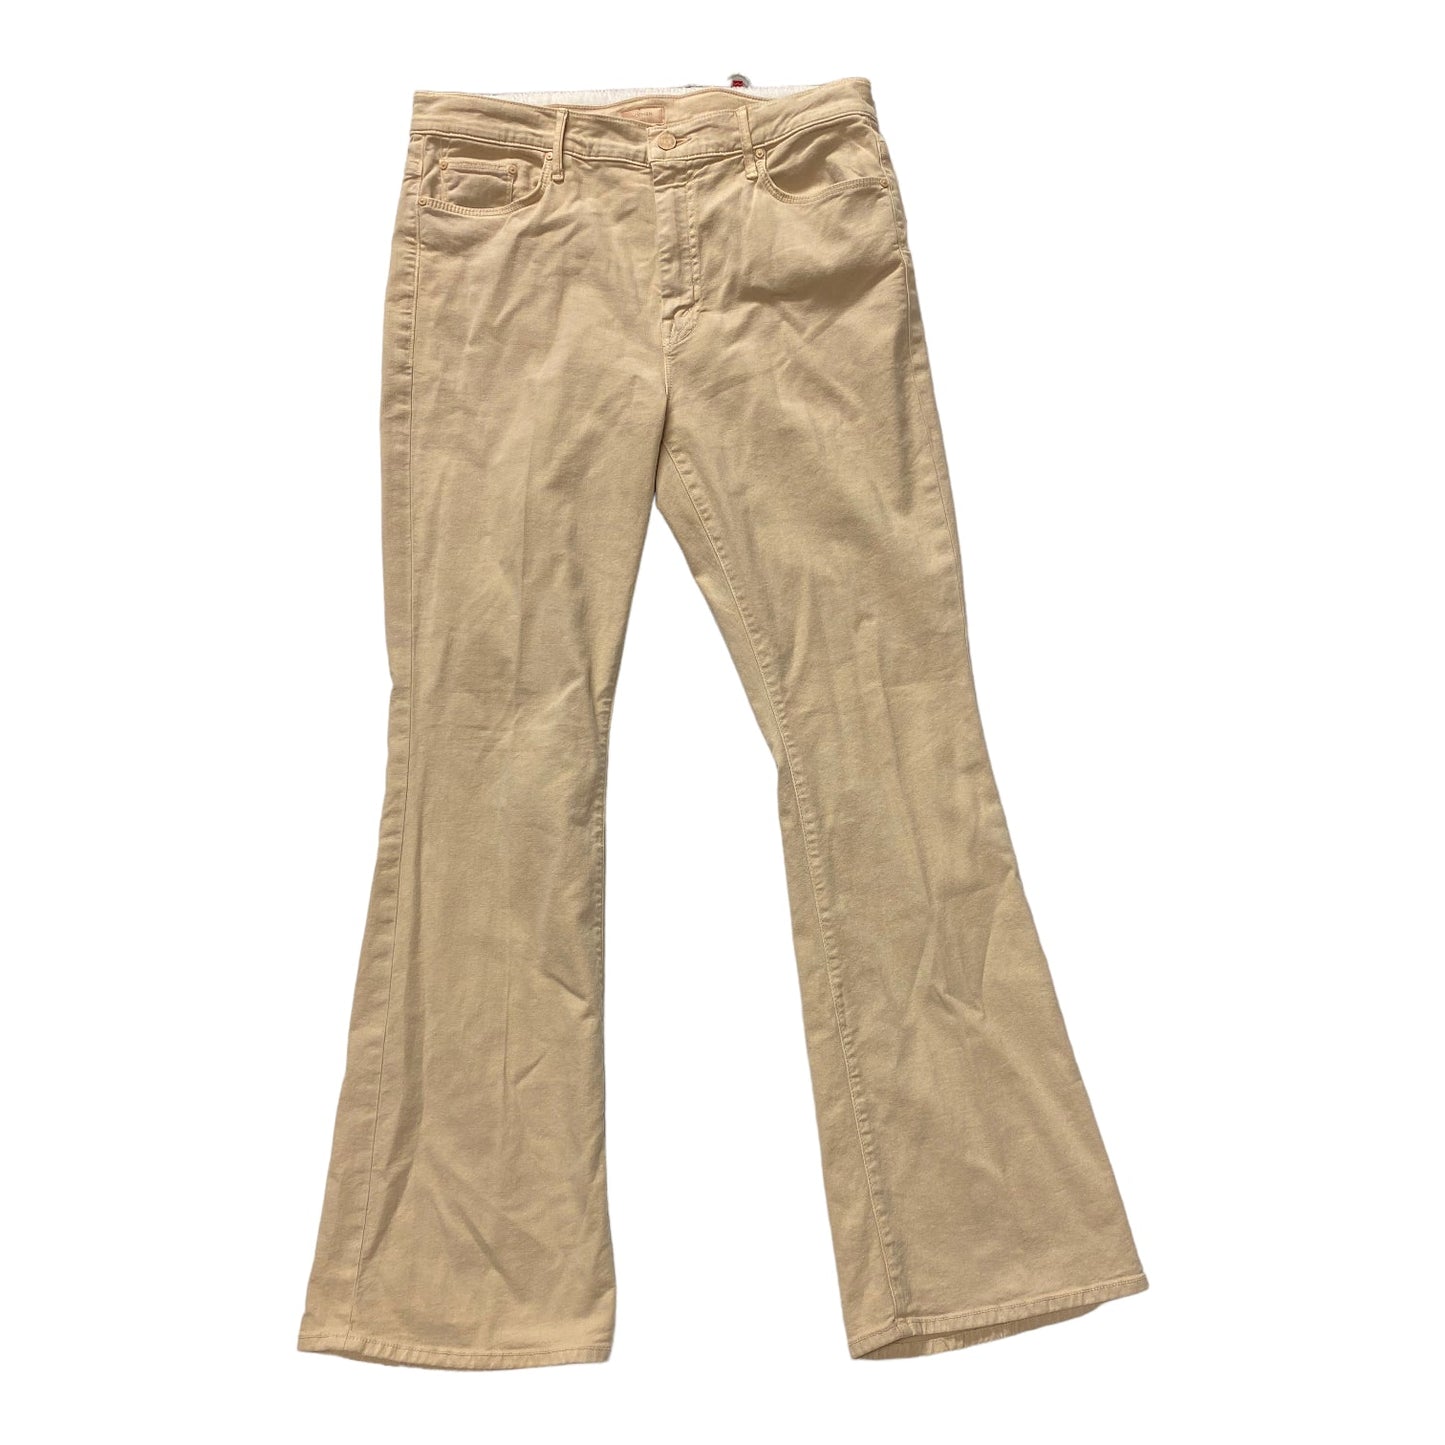 Tan Jeans Flared Mother, Size 16